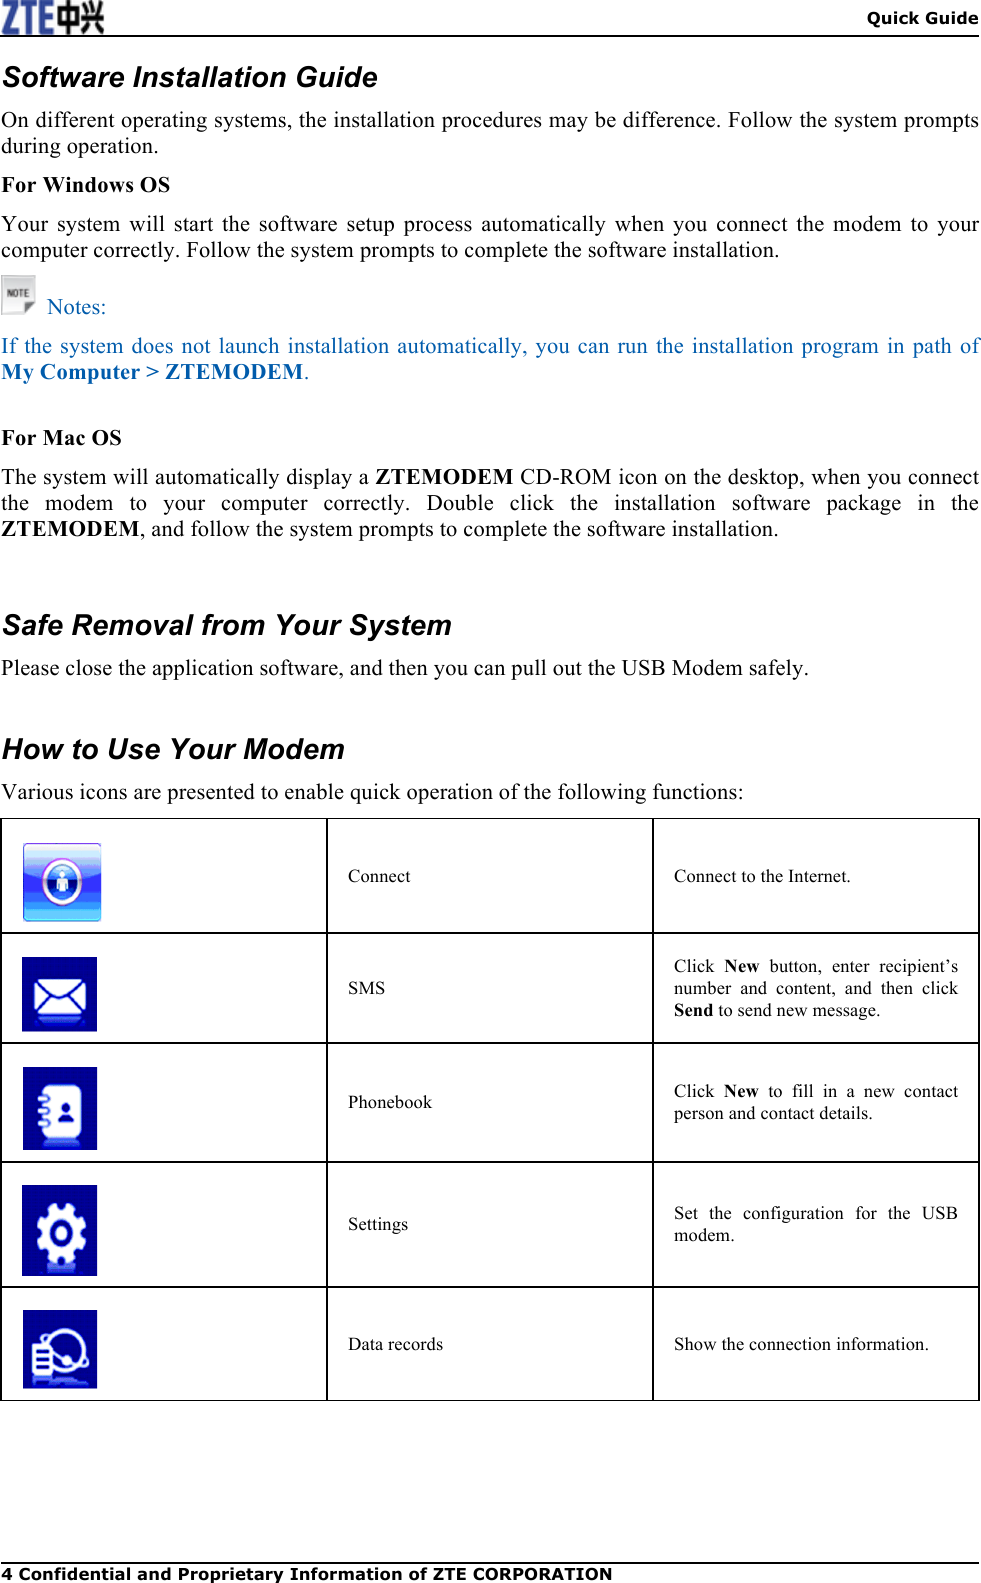  Quick Guide 4 Confidential and Proprietary Information of ZTE CORPORATION Software Installation Guide On different operating systems, the installation procedures may be difference. Follow the system prompts during operation. For Windows OS Your system will start  the  software setup process automatically  when  you  connect the modem  to  your computer correctly. Follow the system prompts to complete the software installation.  Notes: If the system does not launch installation automatically, you can run the installation program in path of My Computer &gt; ZTEMODEM.  For Mac OS The system will automatically display a ZTEMODEM CD-ROM icon on the desktop, when you connect the  modem  to  your  computer  correctly.  Double  click  the  installation  software  package  in  the ZTEMODEM, and follow the system prompts to complete the software installation.   Safe Removal from Your System Please close the application software, and then you can pull out the USB Modem safely.  How to Use Your Modem Various icons are presented to enable quick operation of the following functions:  Connect Connect to the Internet.  SMS Click  New button,  enter  recipient’s number  and  content,  and  then  click Send to send new message.  Phonebook Click  New to  fill  in  a  new  contact person and contact details.  Settings Set the  configuration  for  the  USB modem.  Data records Show the connection information.   